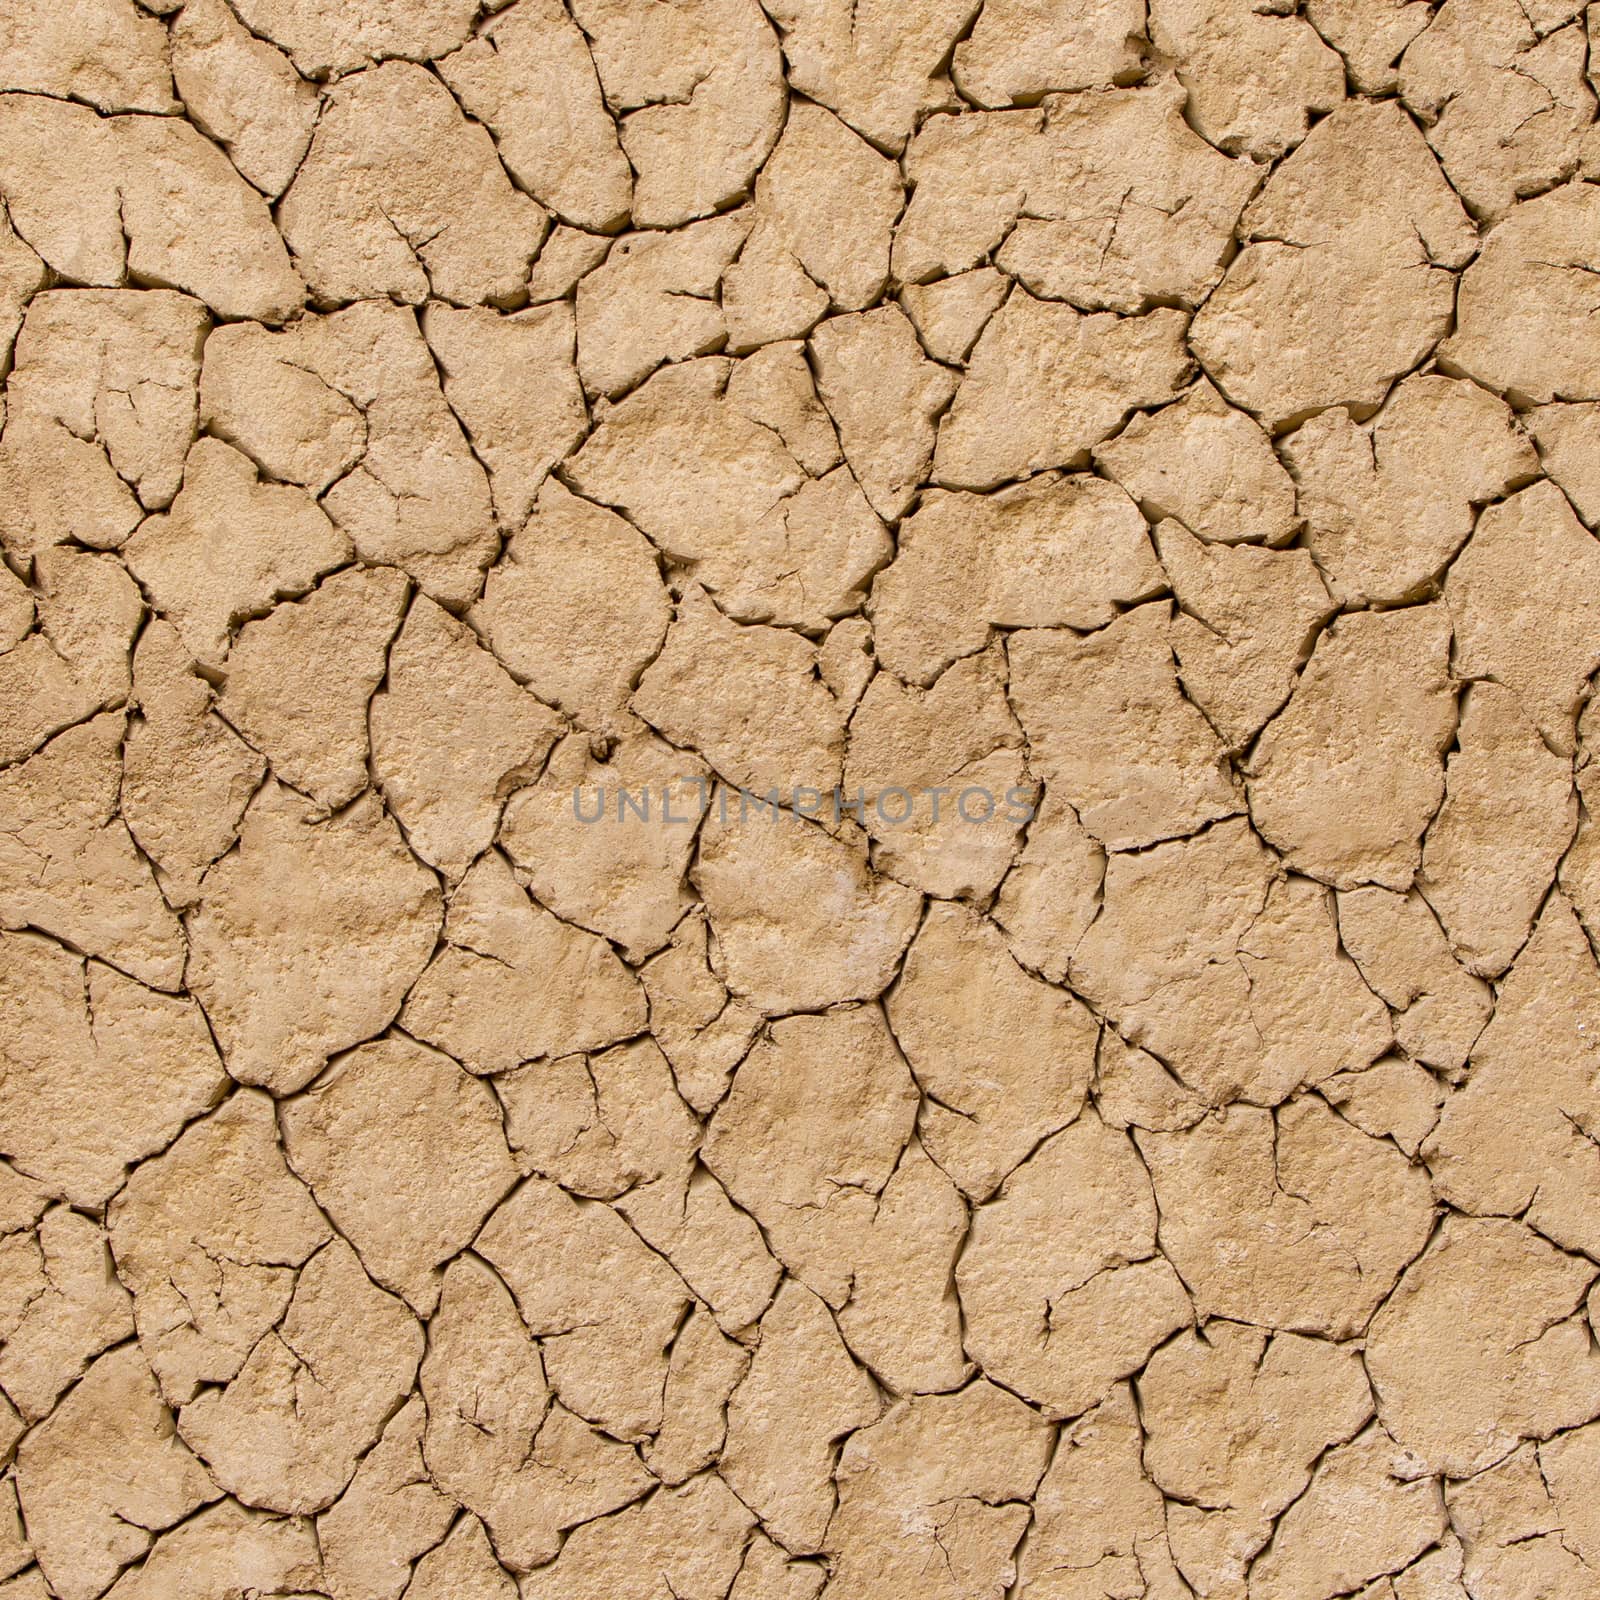 Cracks in the ground, background image (brown)